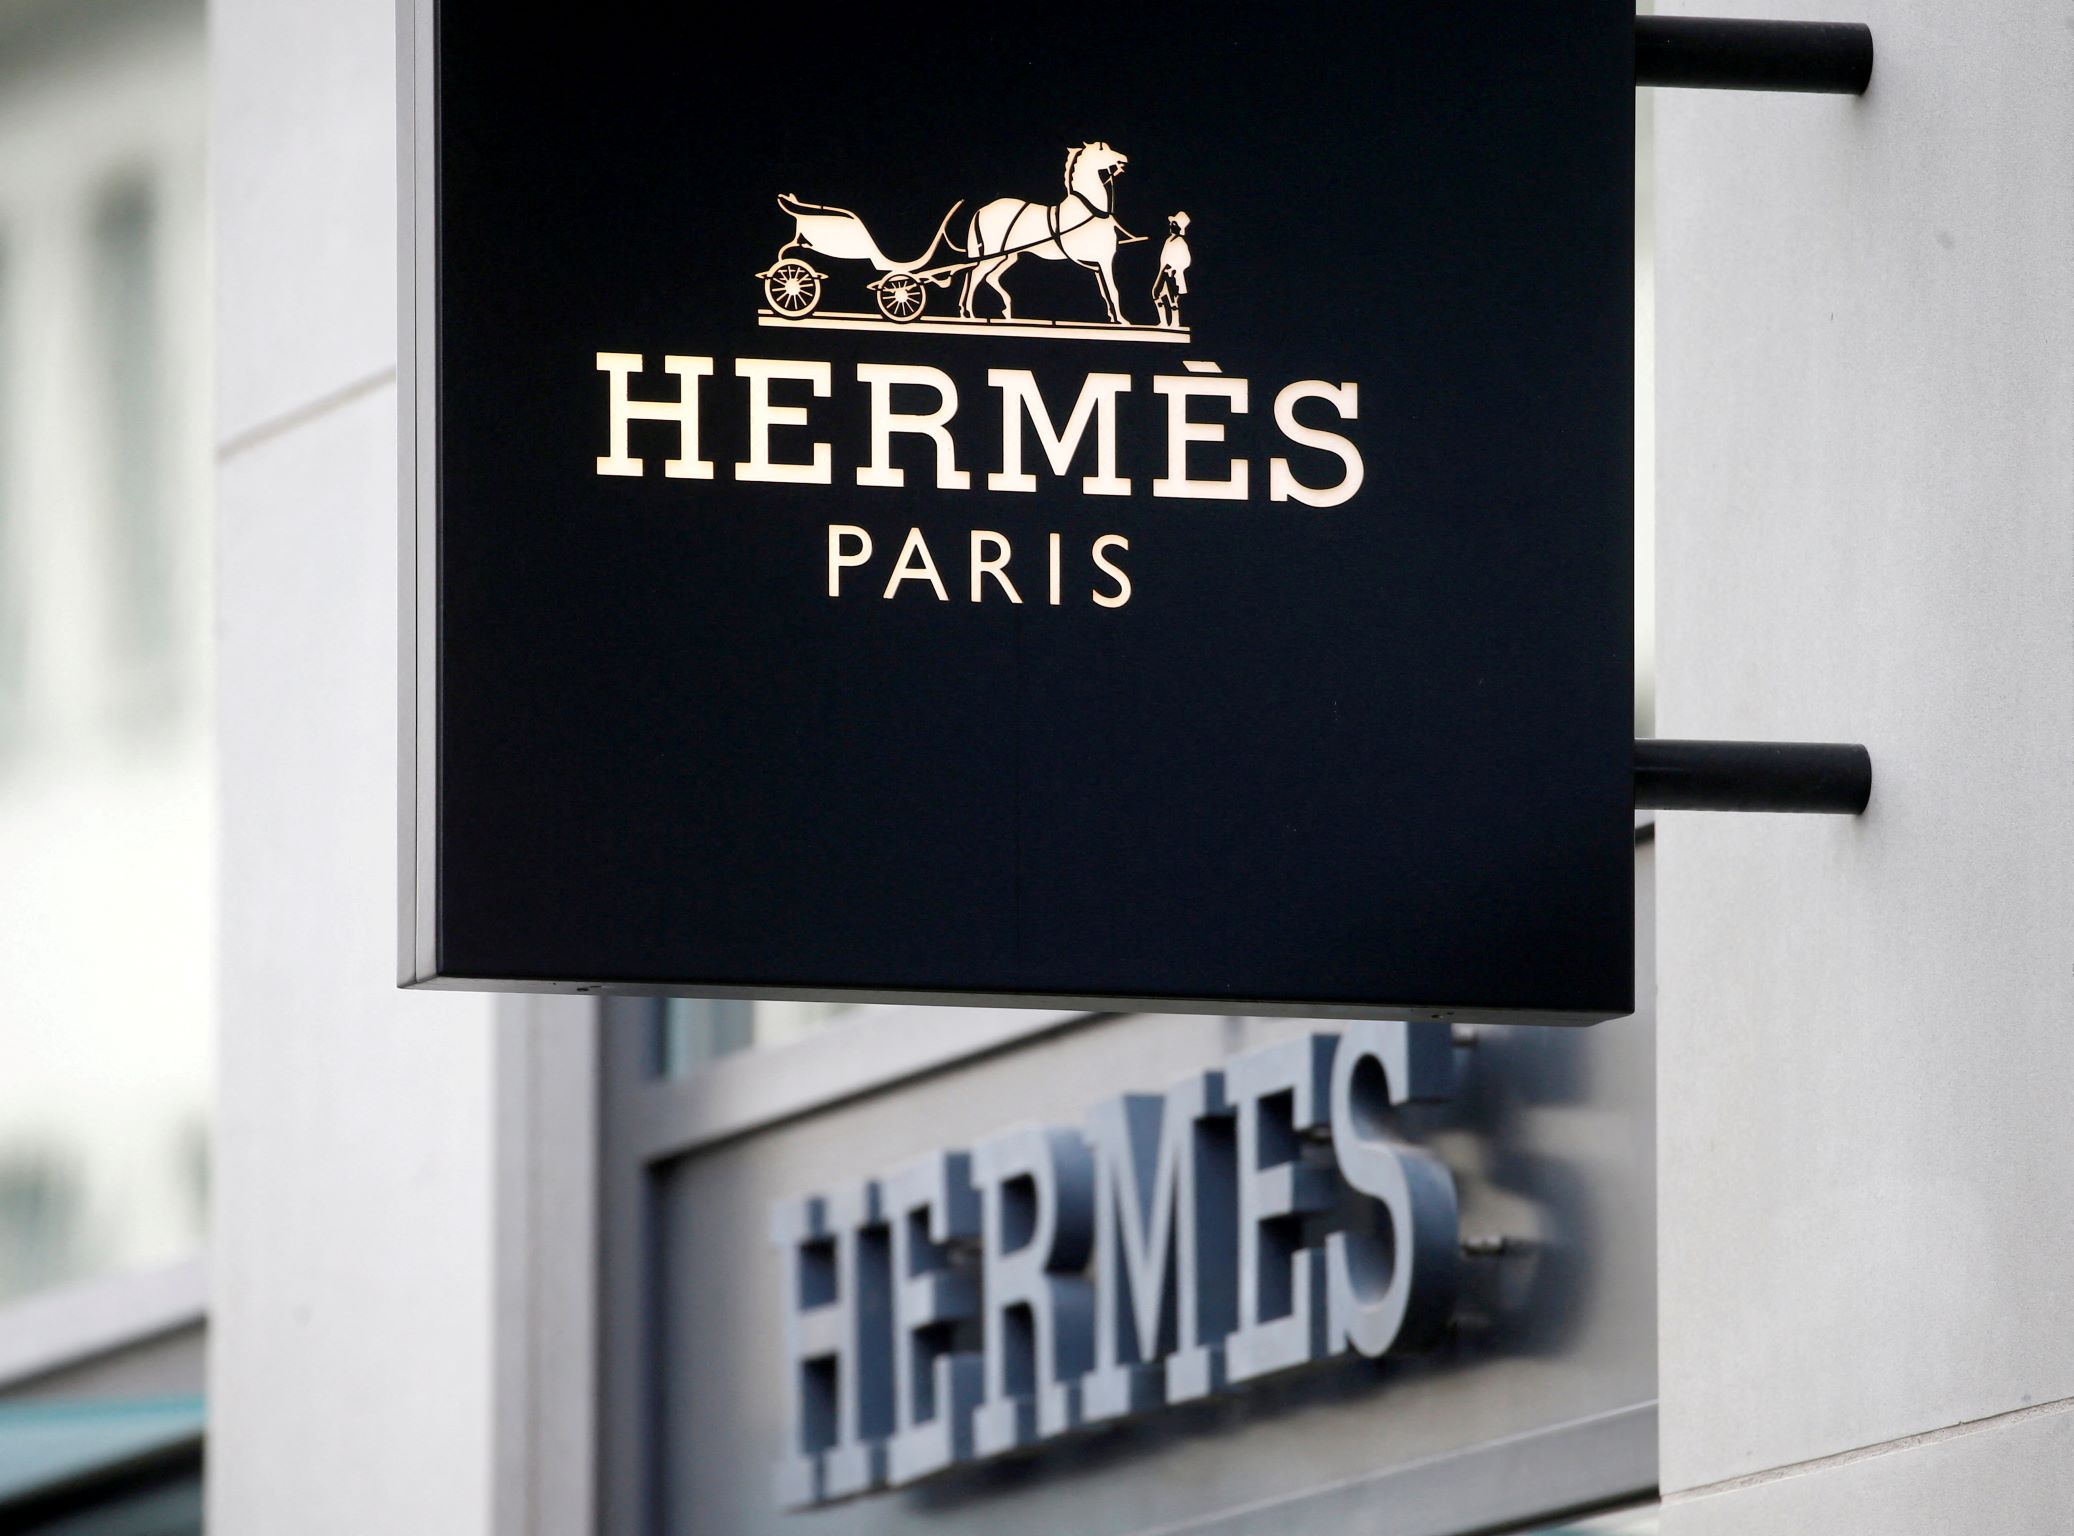 Hermes on Track to Become Top Luxury Brand Overtaking Louis Vuitton